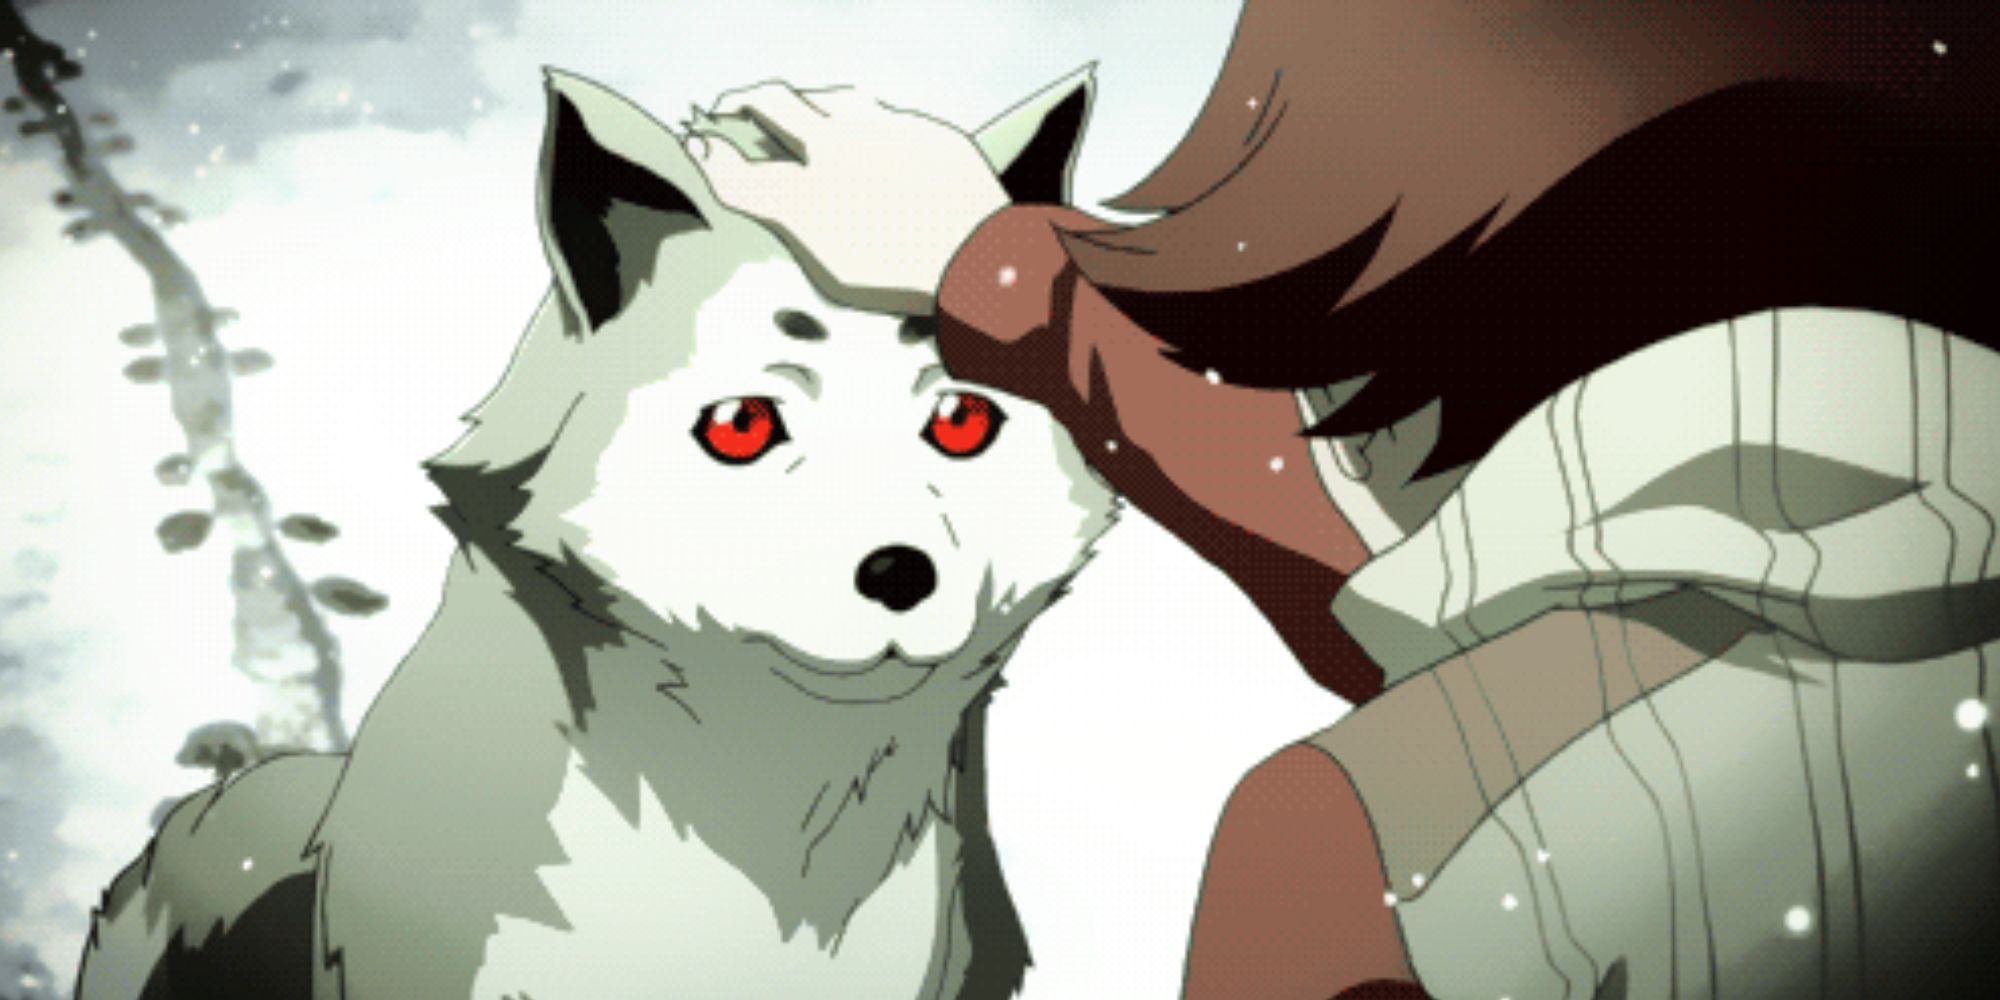 an animated shot of Koromaru from Persona 3 Portable being petted on the head against a backdrop of snow